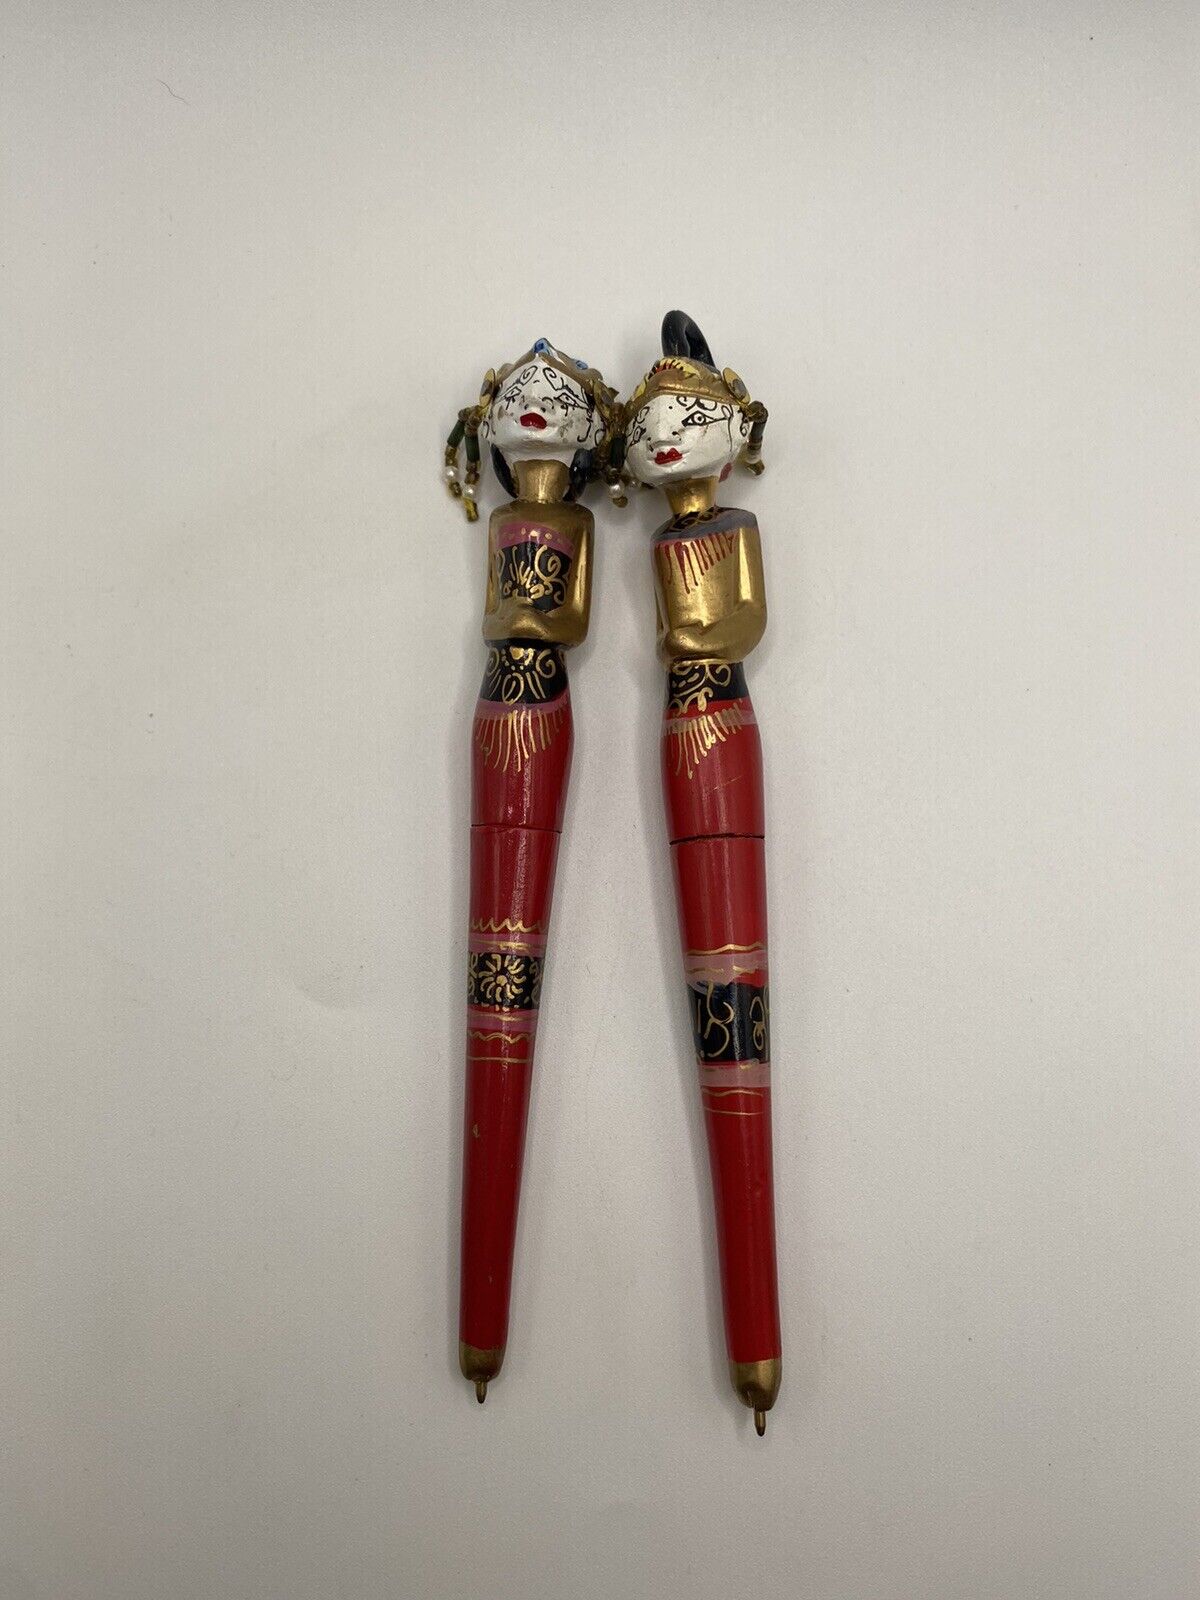 2 Vintage Wayang Golek Handmade And Painted Pen Puppets. Art. Office. Antique.